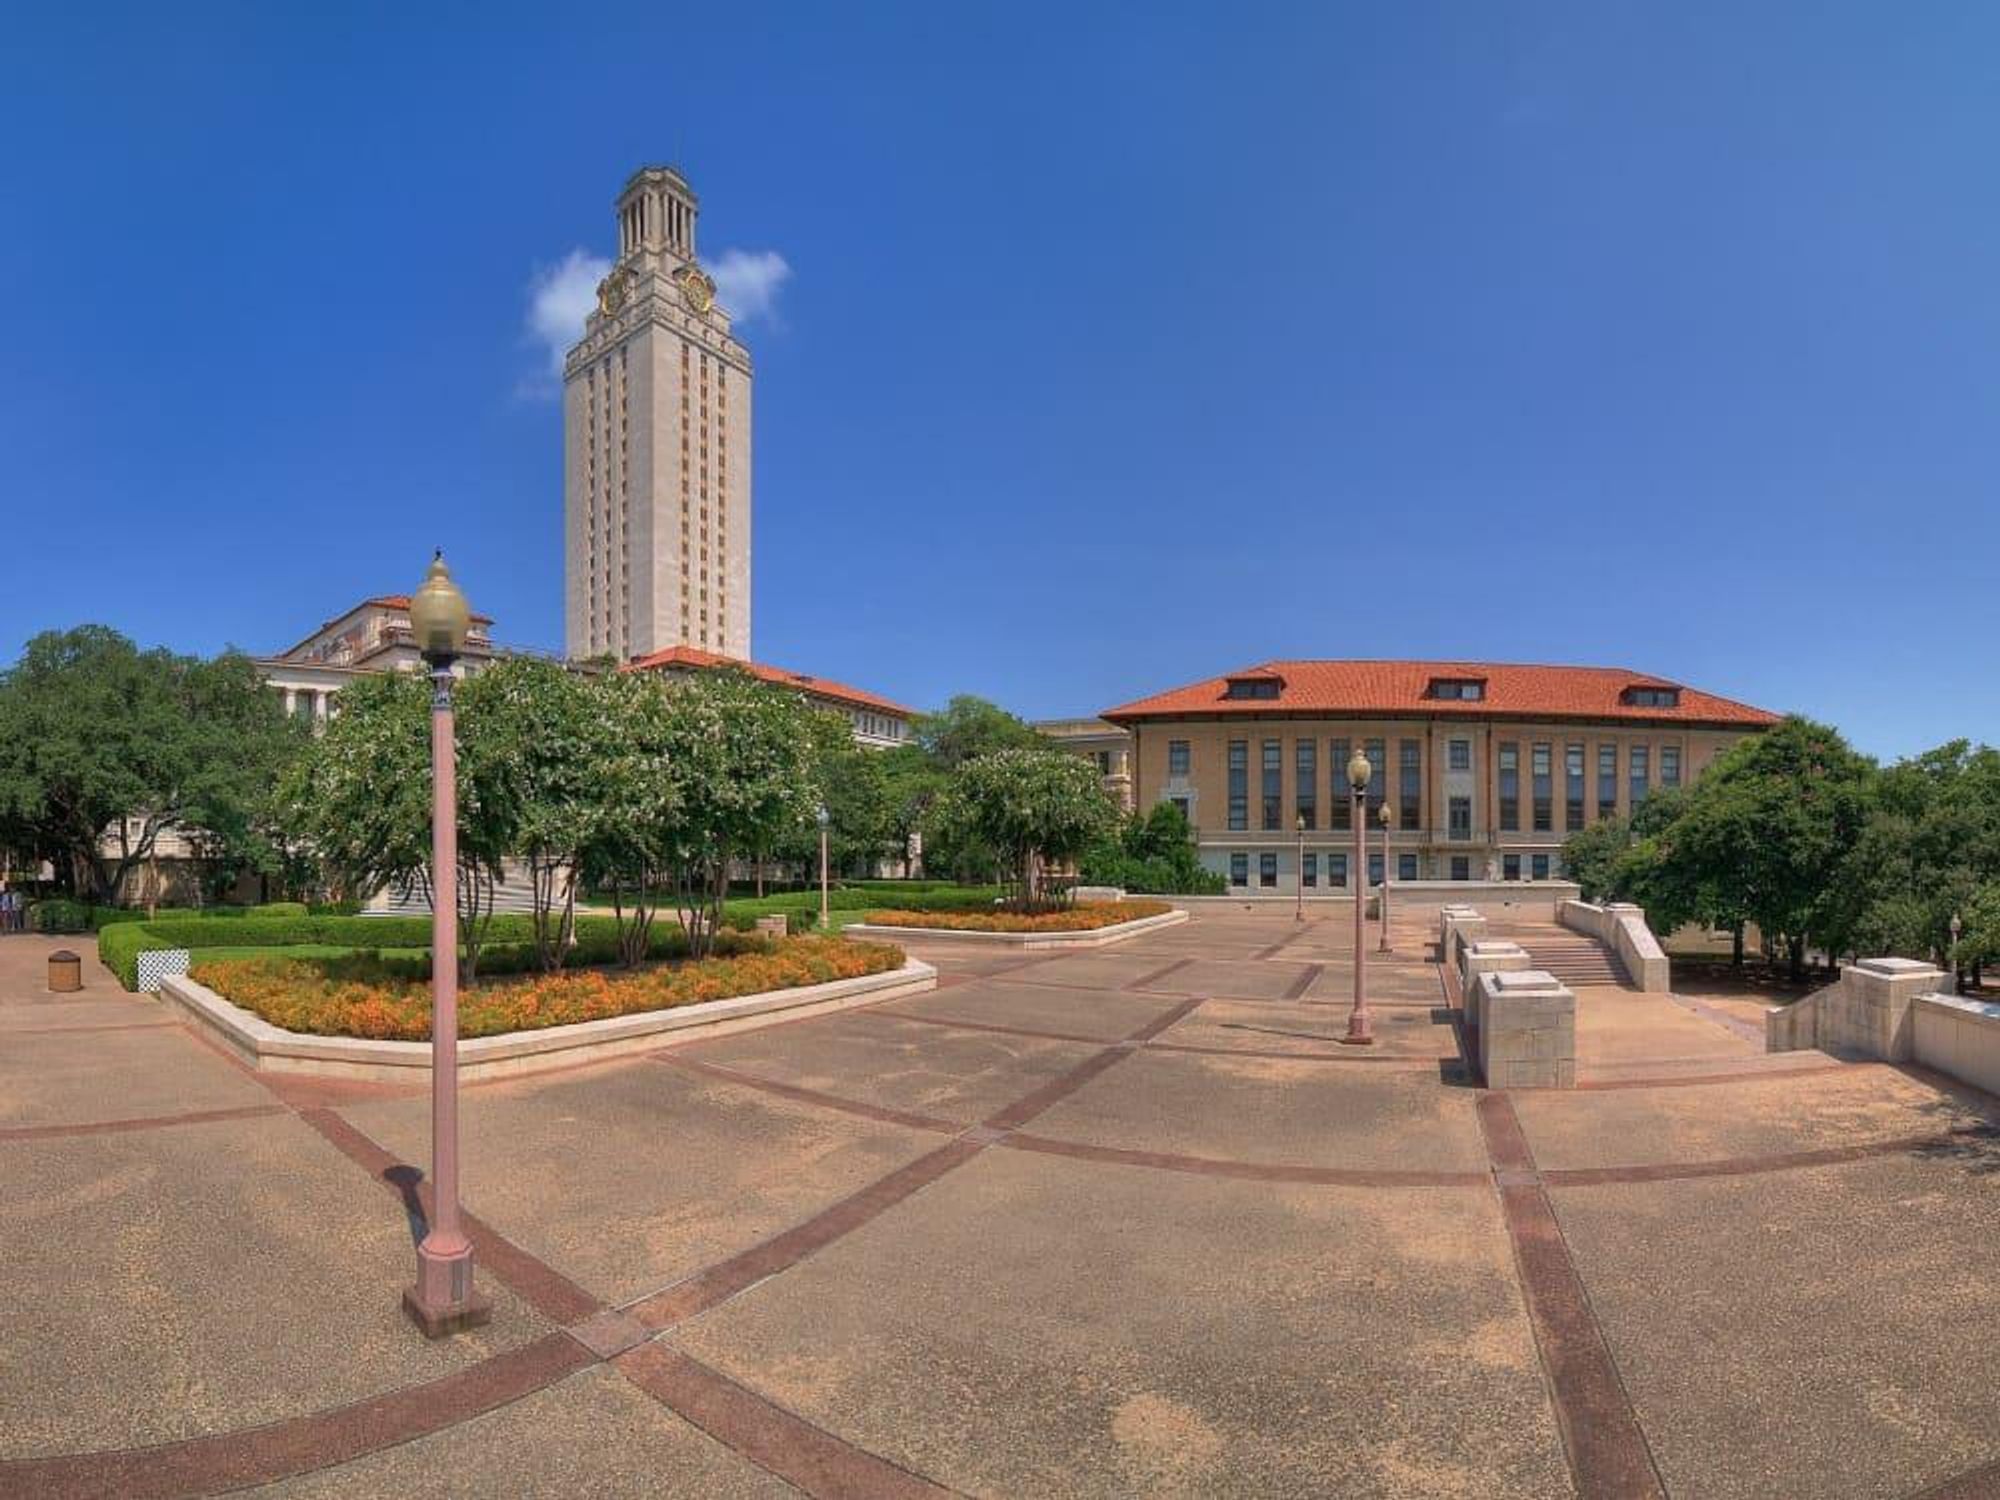 University of Texas at Austin, campus, tower